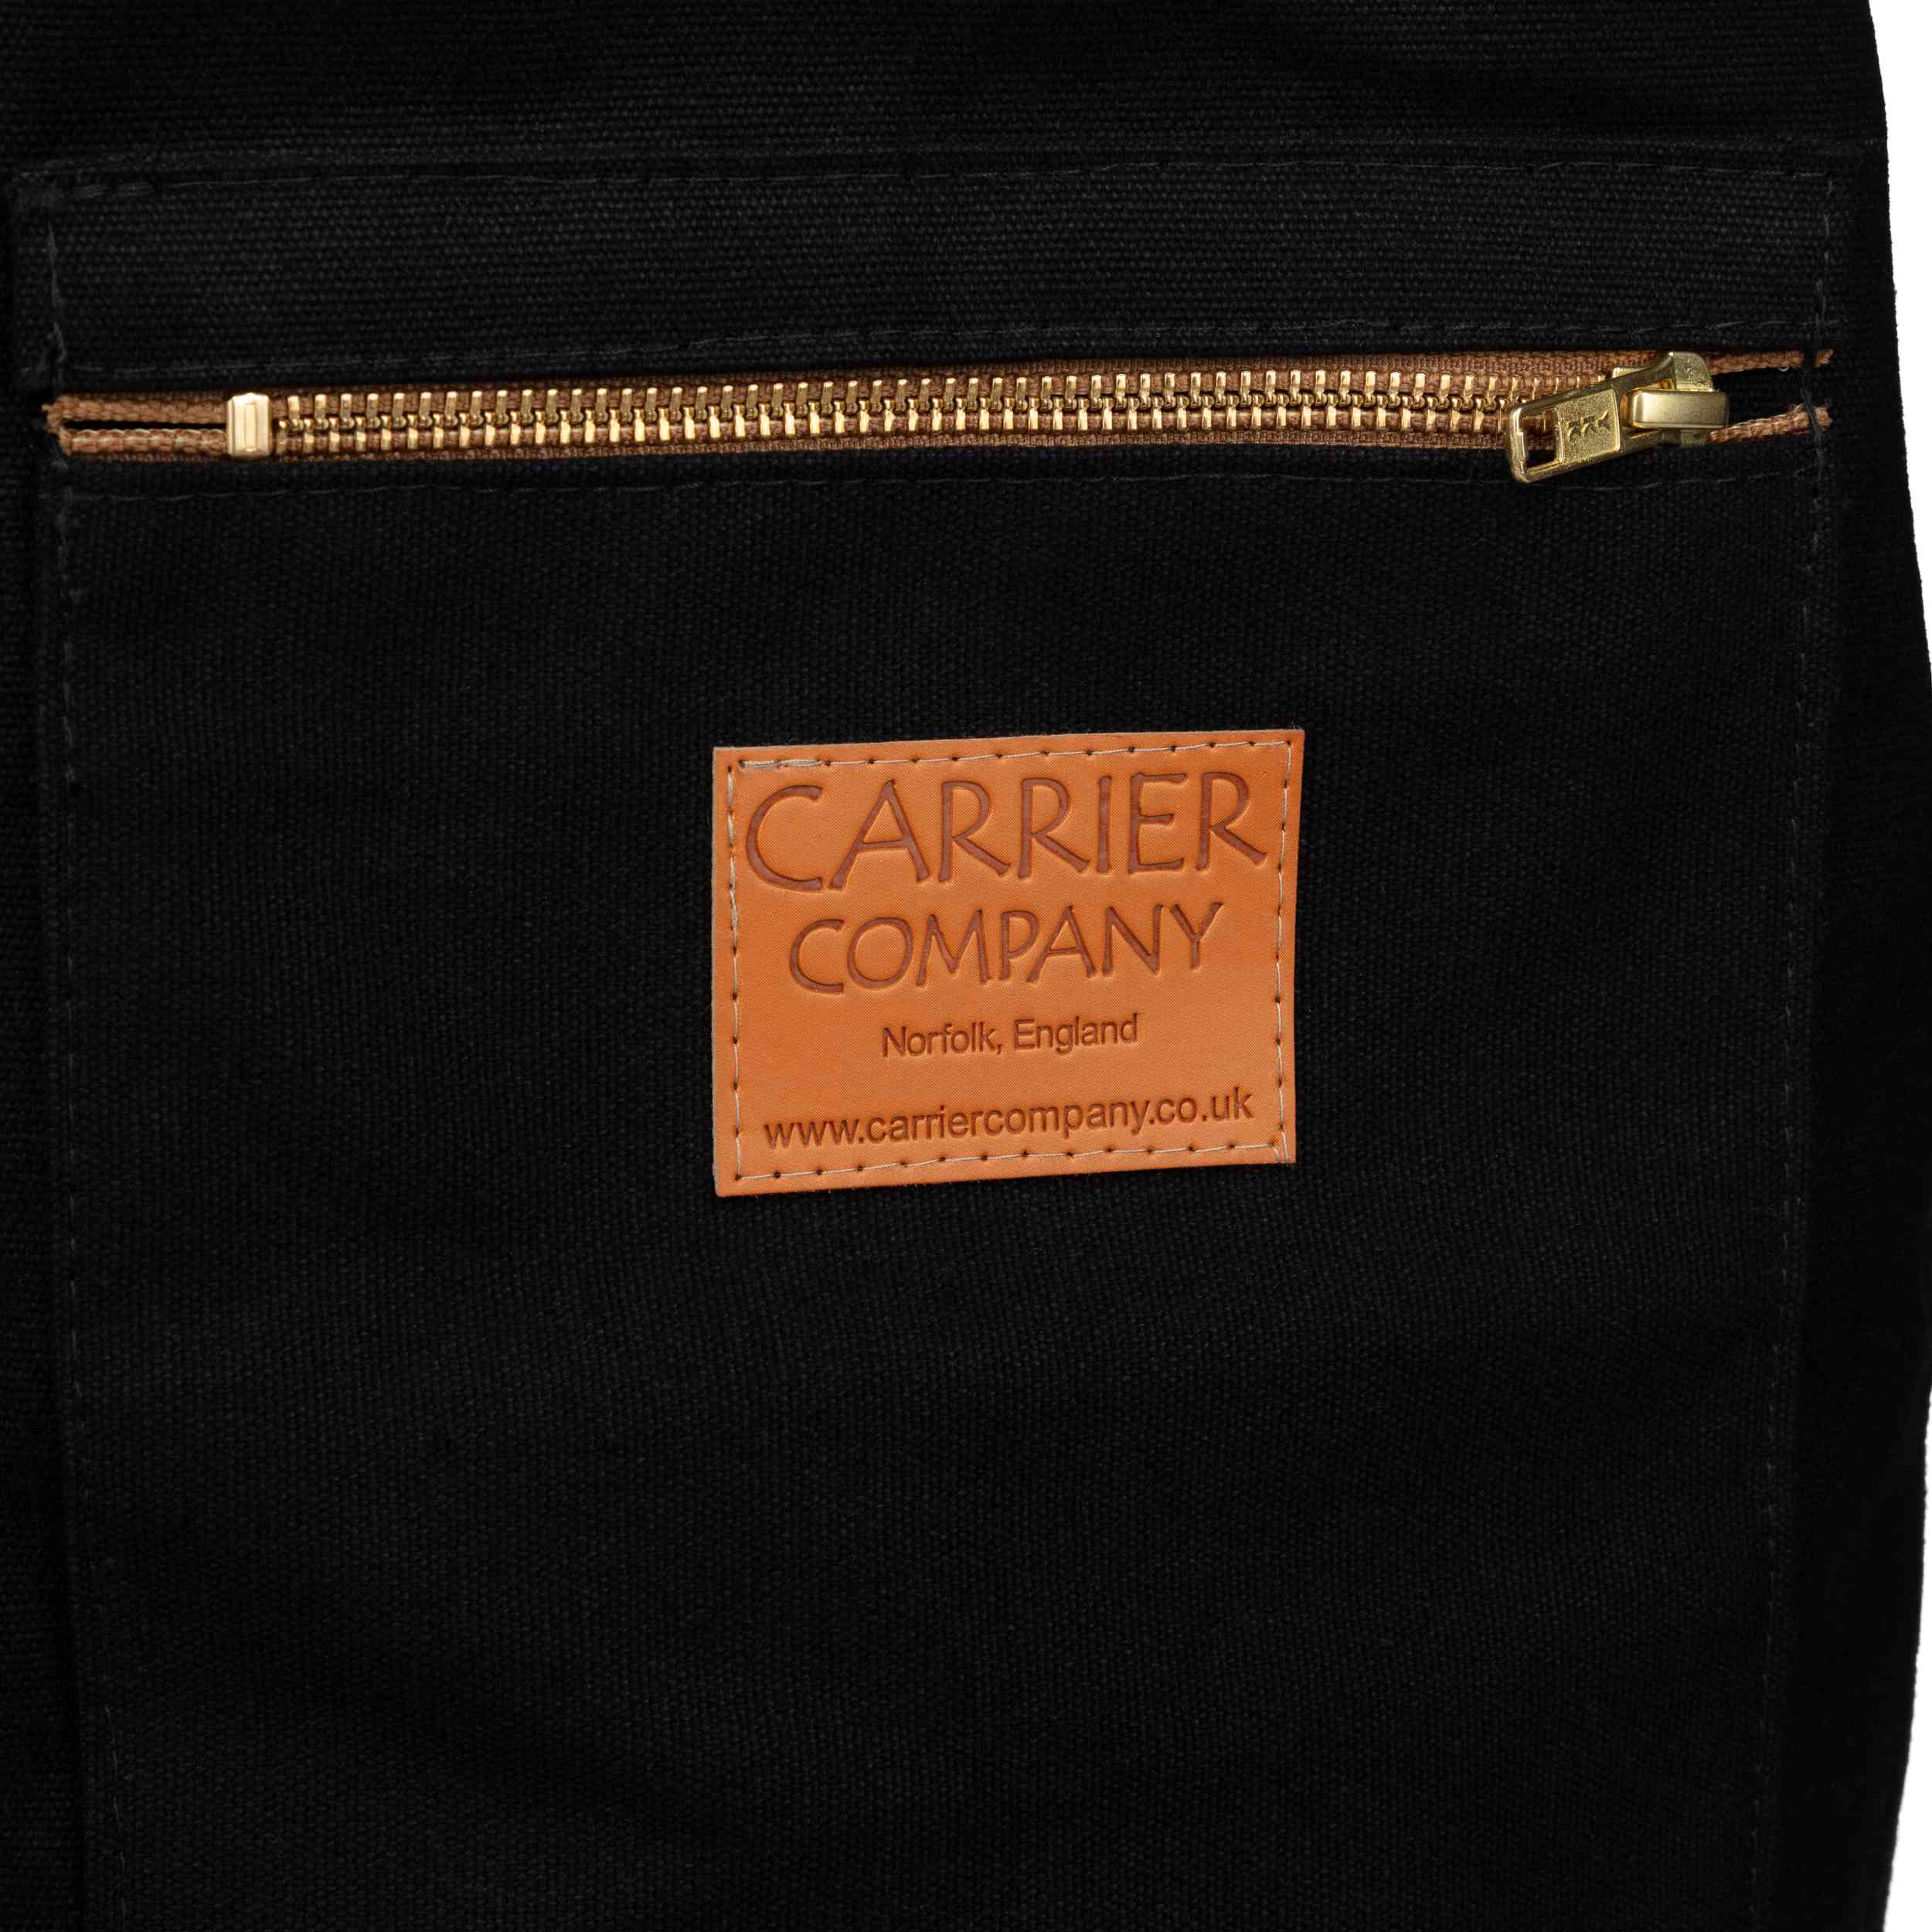 Carrier Company Duffle Bag in Black